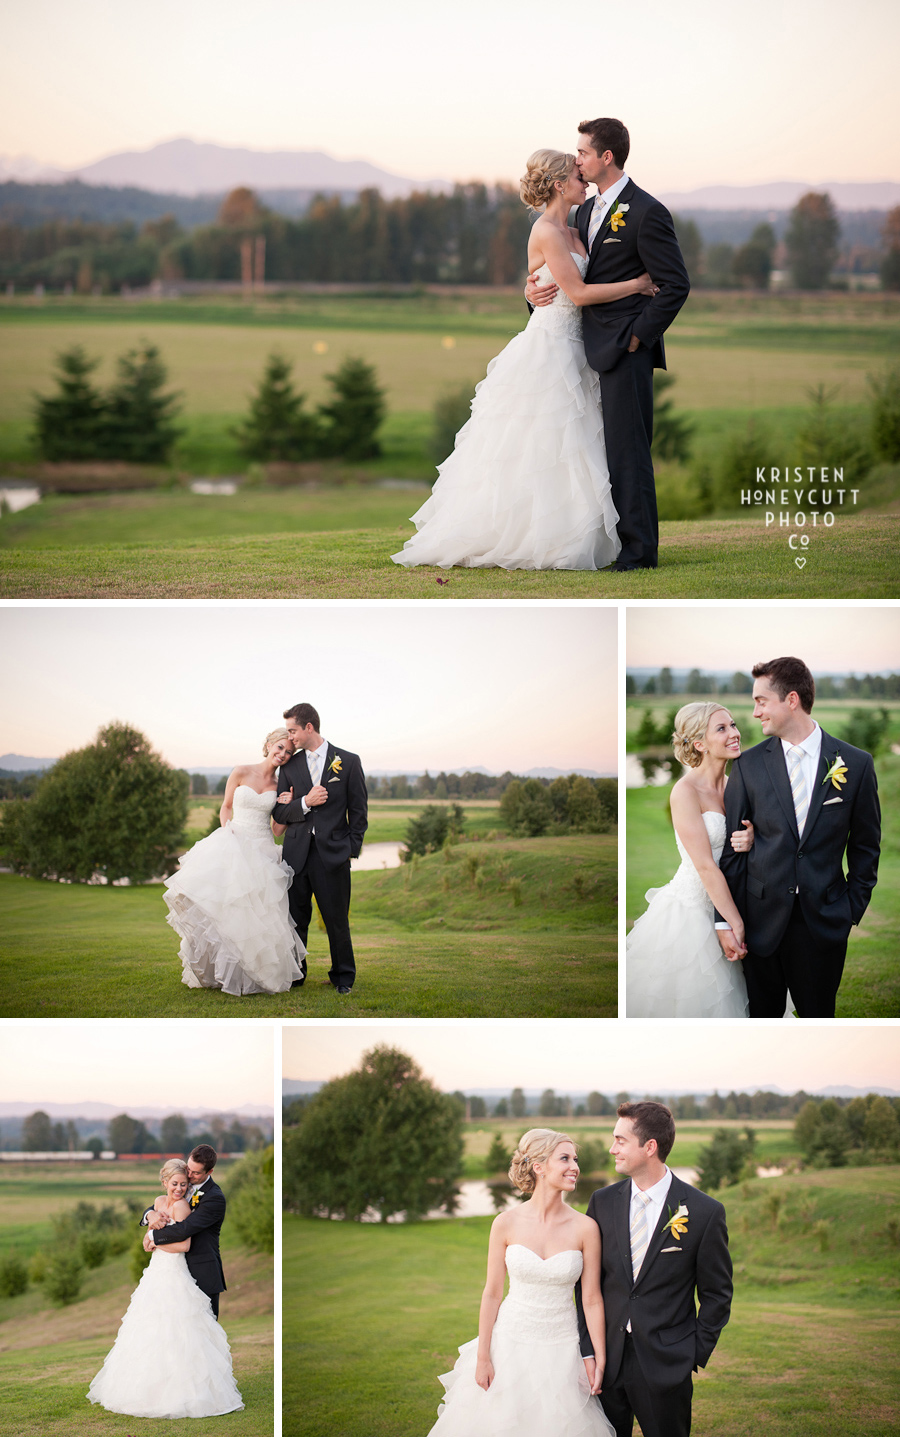 Lord Hill farms newlywed pictures at sunset at Seattle area wedding venue